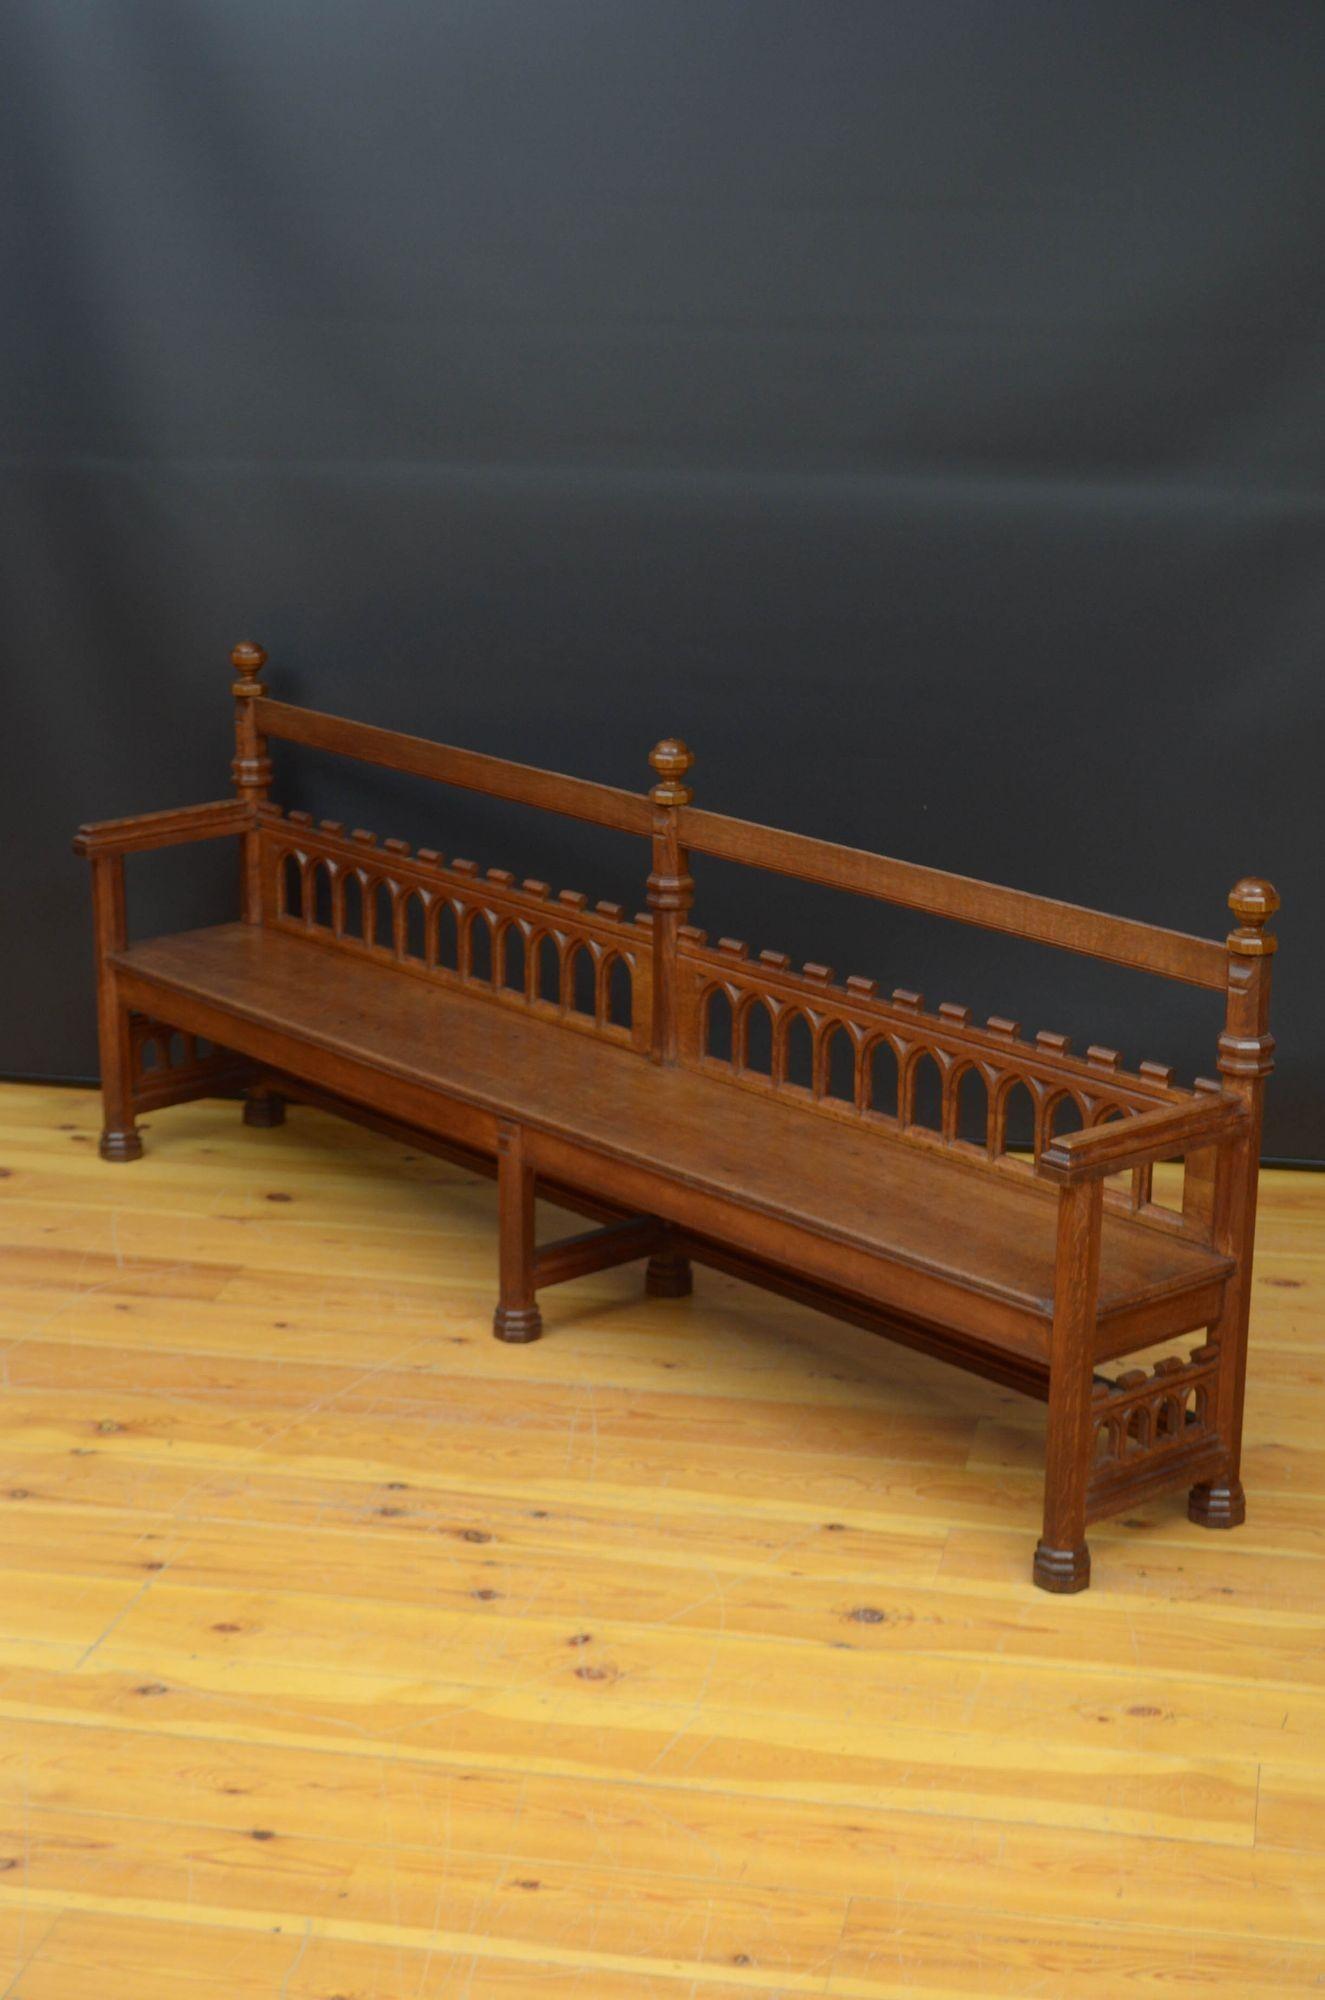 J034 Superb long Gothic Revival hall bench in oak, having shaped top rail with decorative ball finials above arch carved and castellated mid rail, generous solid oak seat with shallow frieze and open, carved arms, all standing on six octagonal